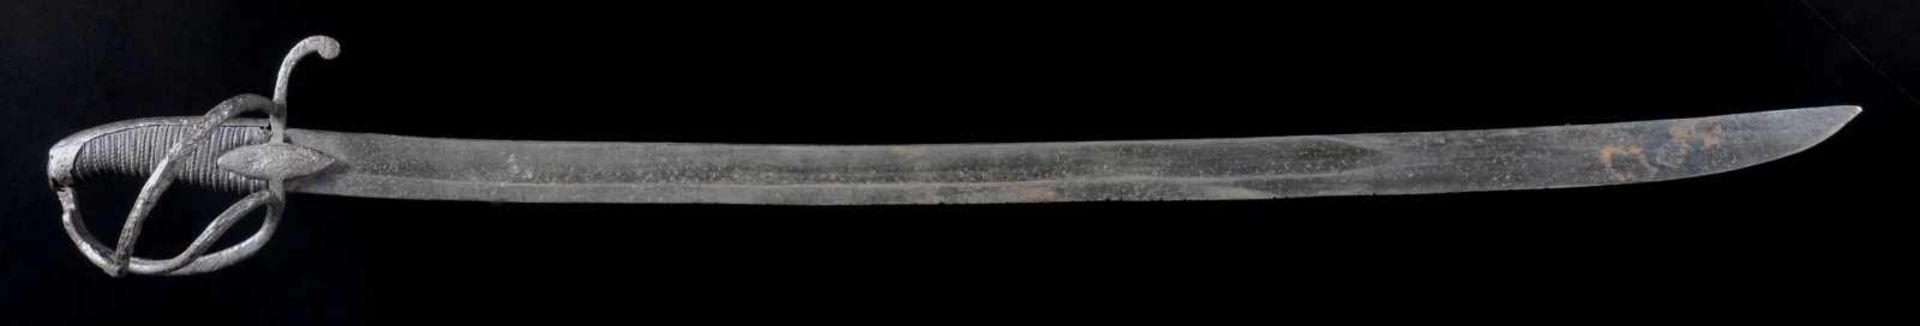 A FRENCH EMPIRE PERIOD LIGHT CAVALRY SWORD IN IRON. FRANCE, EARLY 19TH CENTURY. Origin: France, - Bild 2 aus 9